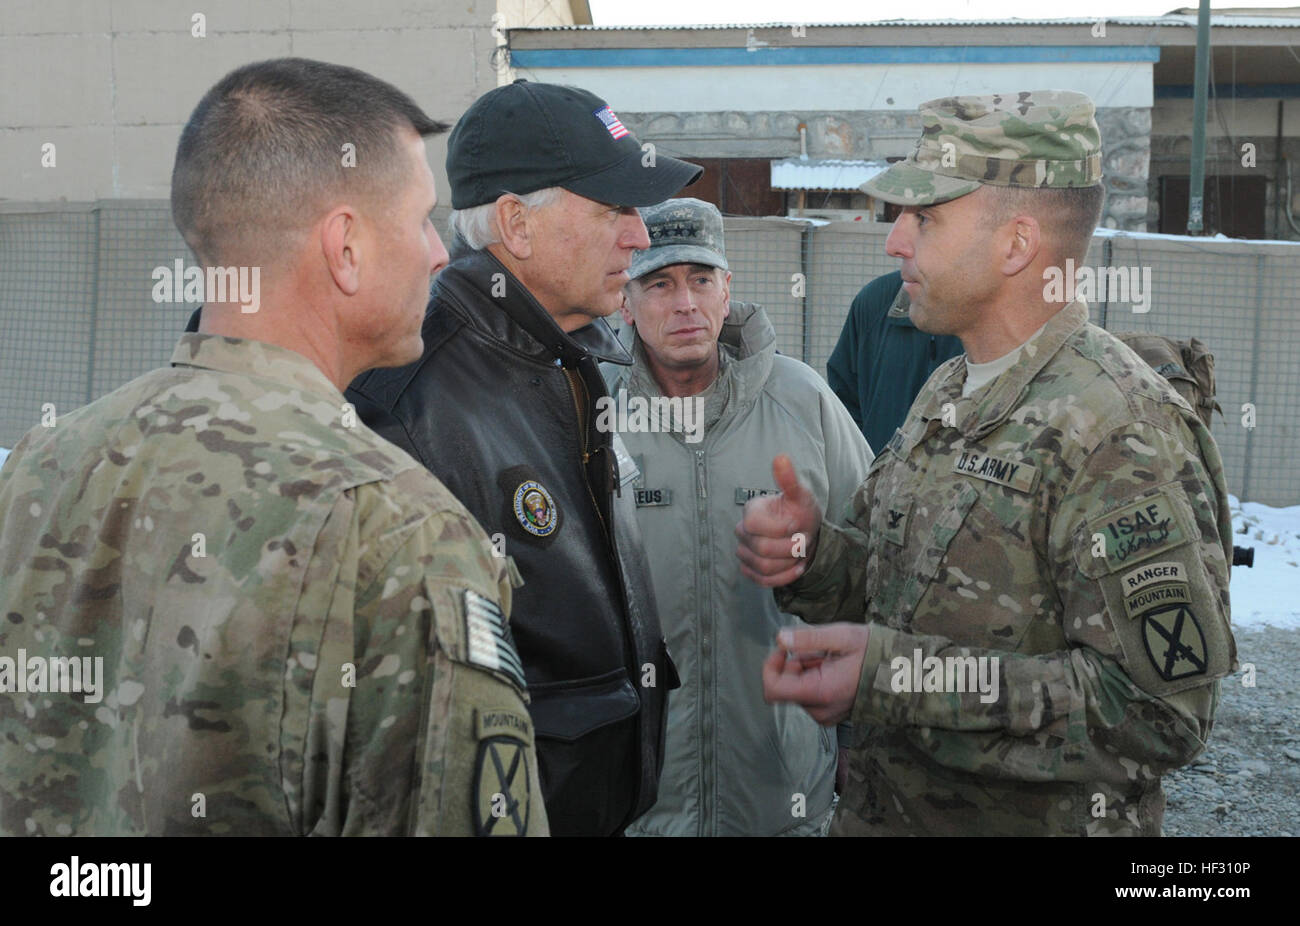 WARDAK PROVINCE, Afghanistan - U.S. Army Col. Bruce P. Antonia (right), Manchester, Conn. native and commander of 4th Brigade Combat Team, 10th Mountain Division's Task Force Patriot based out of Fort Polk, La., talks with U.S. Vice President Joseph Biden (left), while Gen. David Petraeus (middle), commander of International Security Assaistance Force from Cornwall on Hudson, N.Y., and U.S. Army Command Sgt. Maj. Steven Womack (near left), TF Patriot command sergeant major from Leesville, La., listen at Forward Operating Base AIrborne in eastern Afghanistan, Jan. 11. Vice President Biden visit Stock Photo